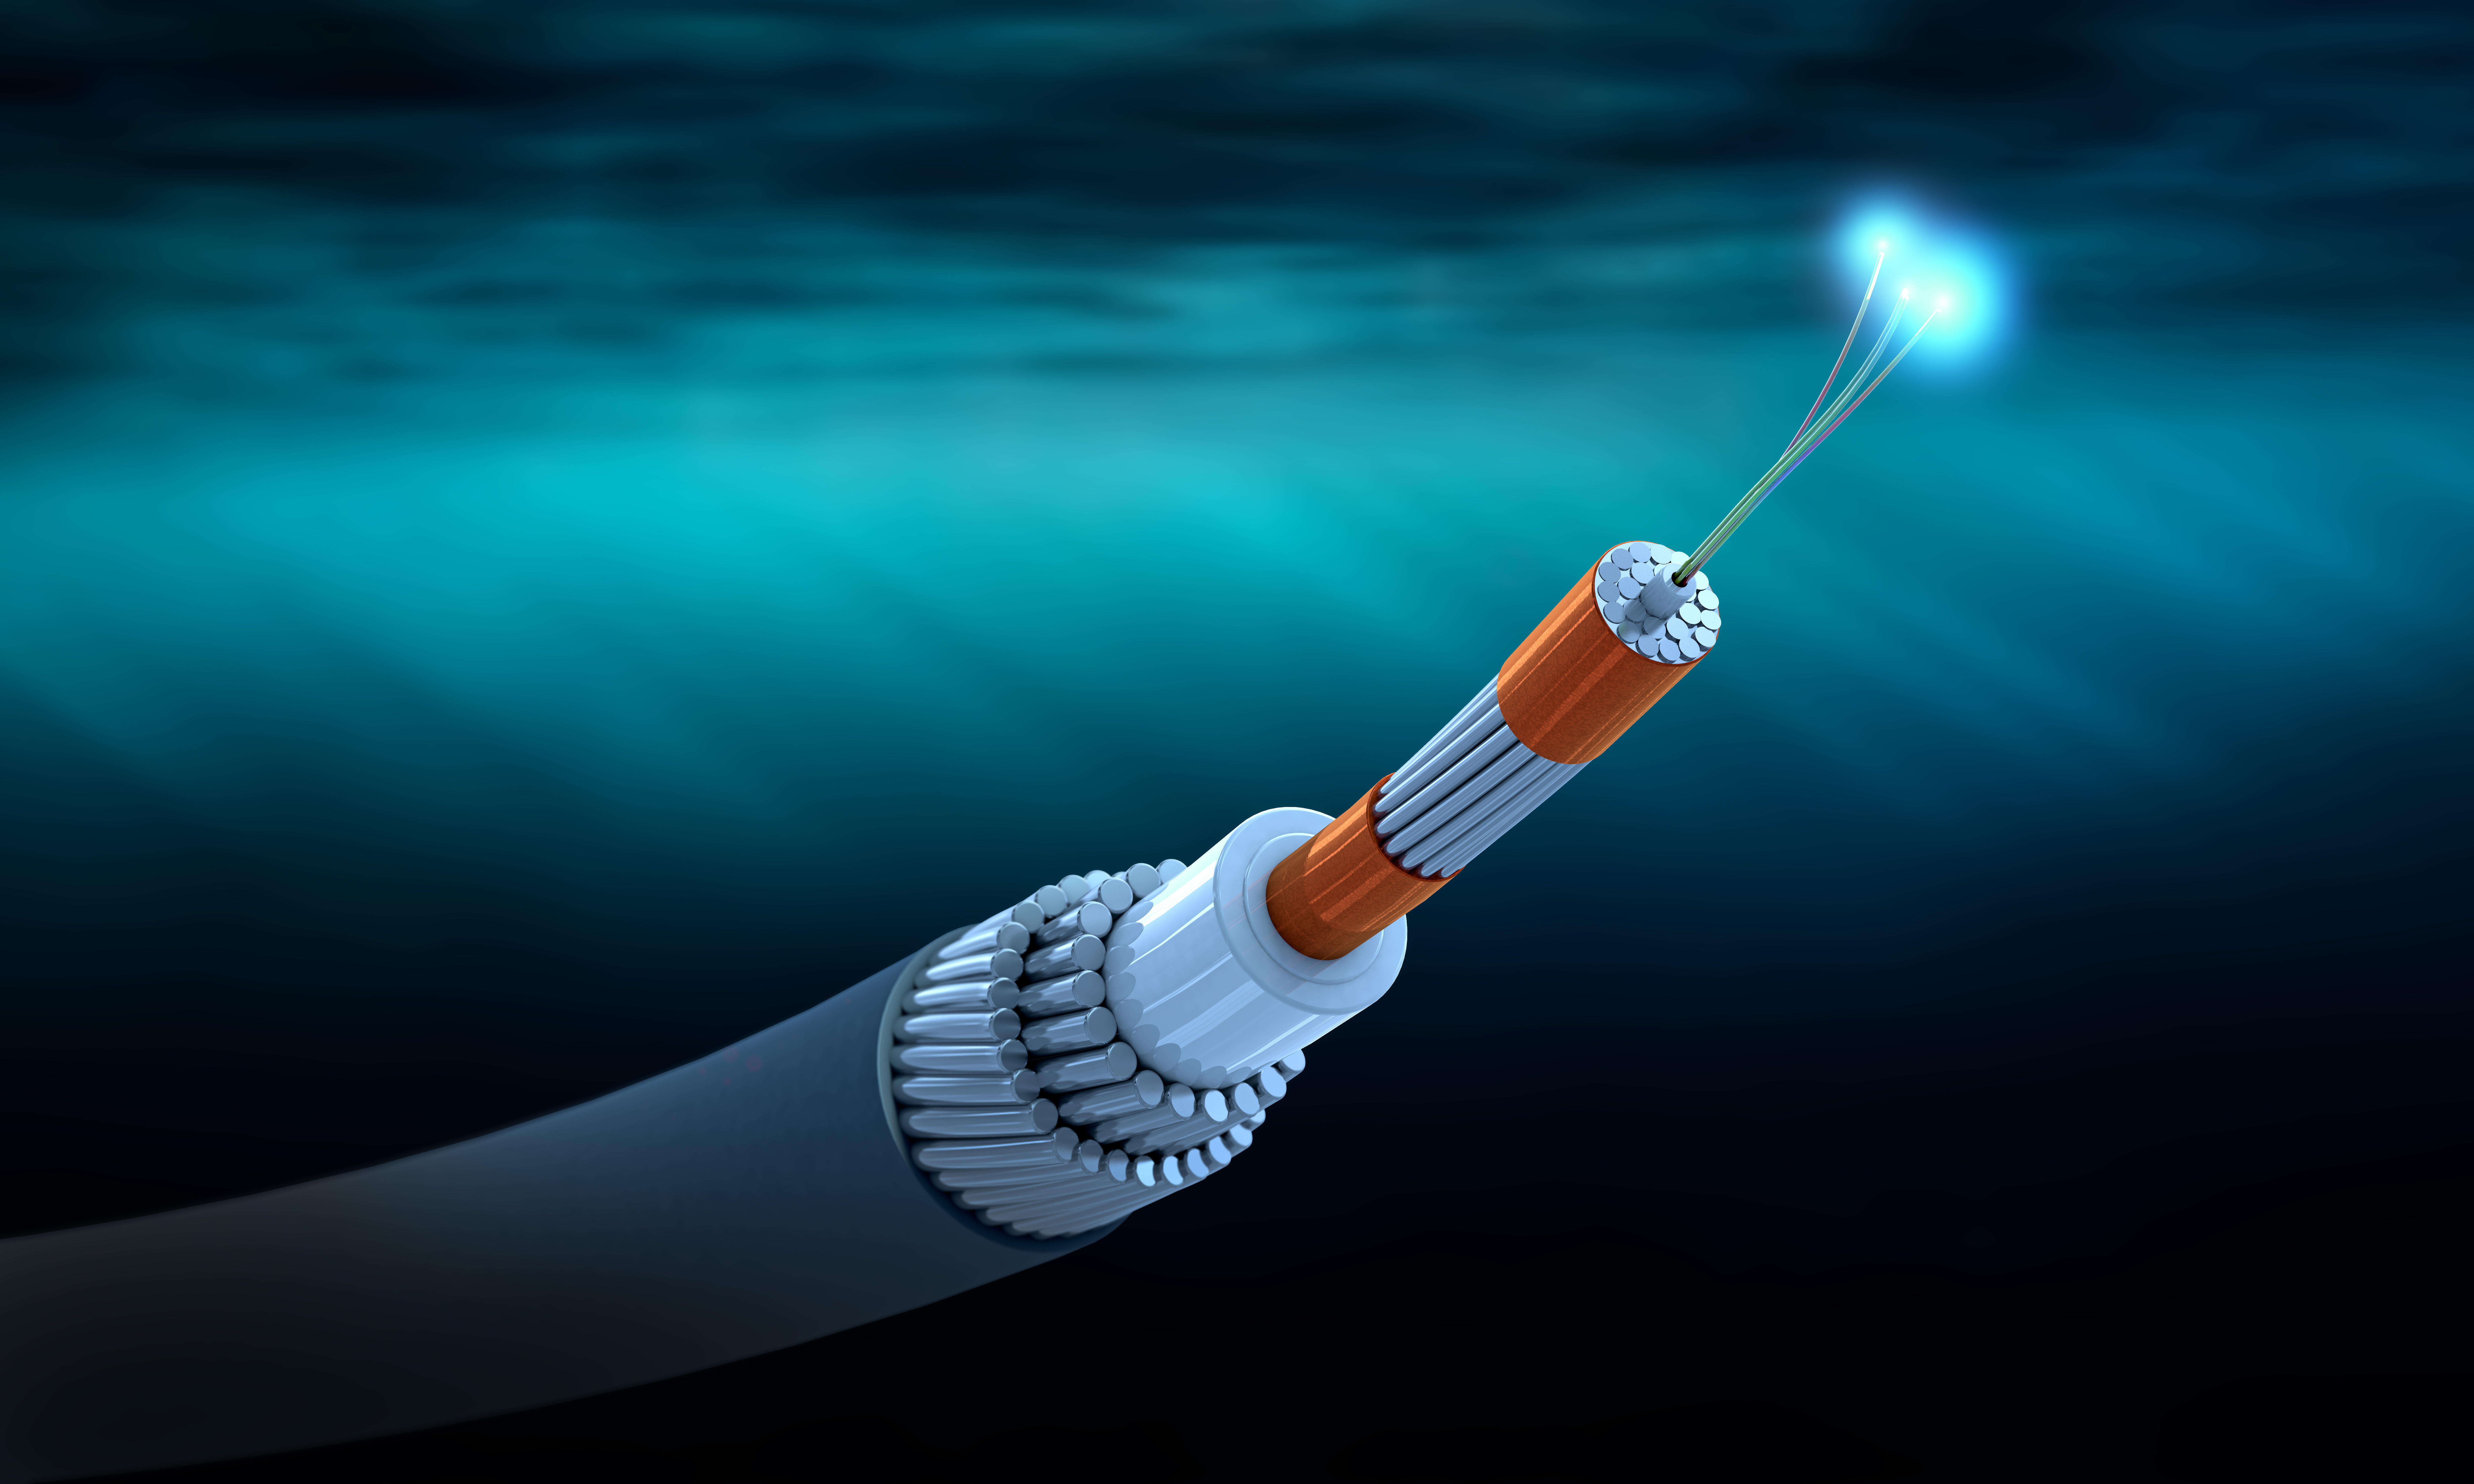 Tata Communications to enhance its network capability with new submarine cable in Asia Pacific